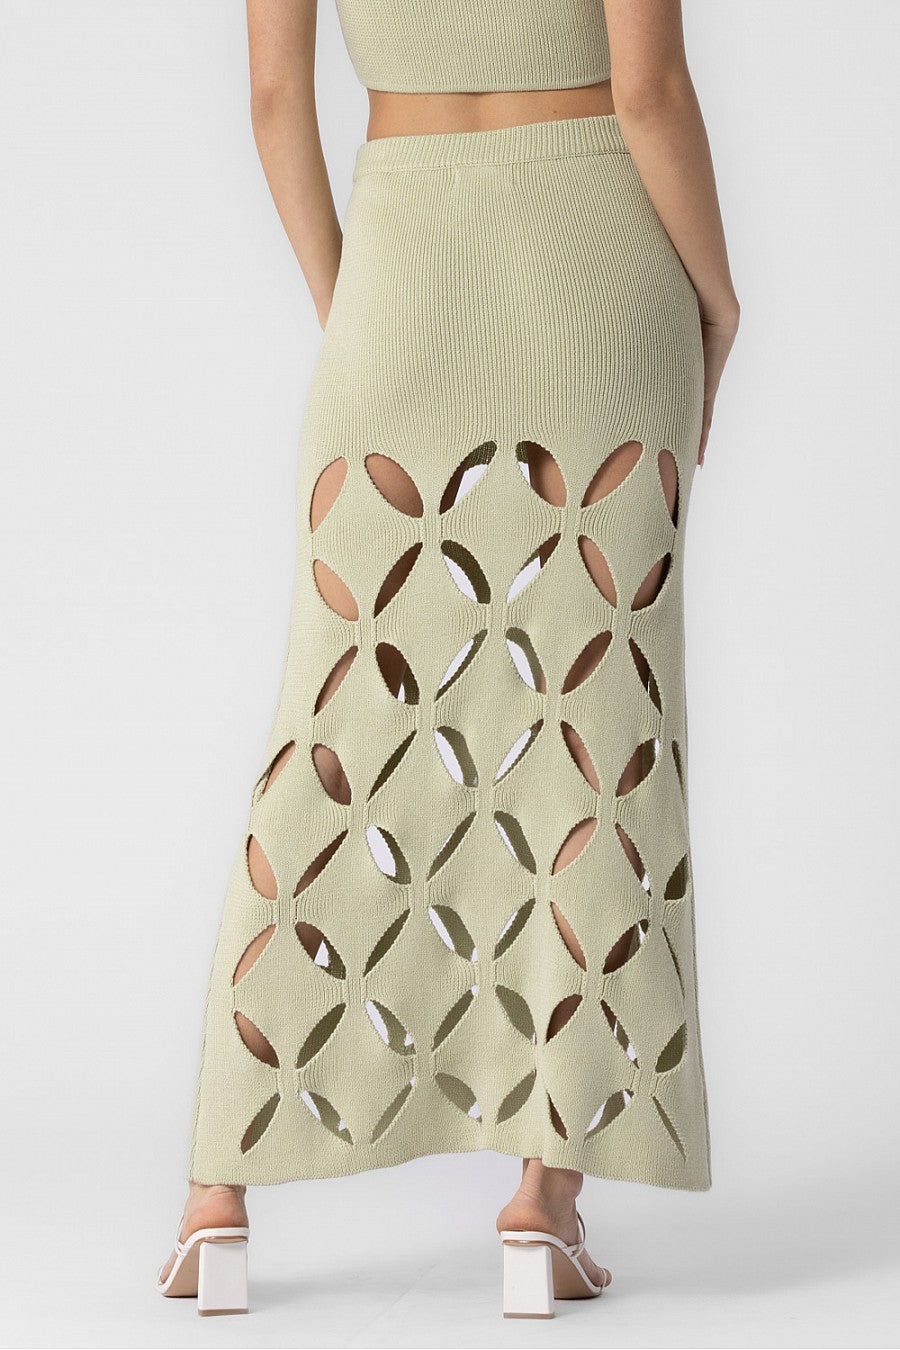 Midi skirt with cut outs in the color sage.